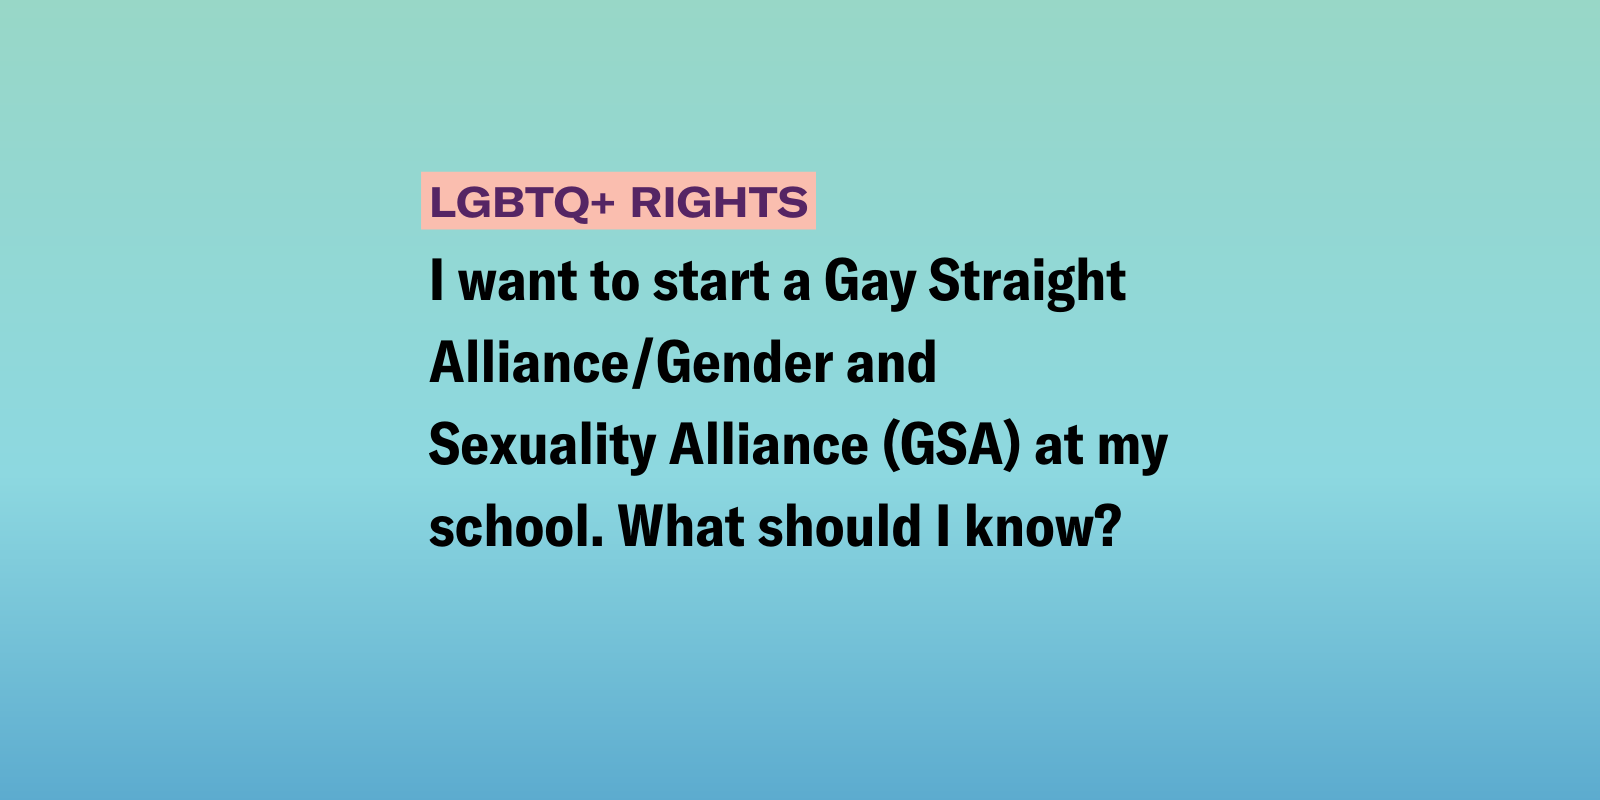 Gradient background of purple, orange and white with the following text "I want to start a Gay Straight Alliance/Gender and Sexuality Alliance (GSA) at my school. What should I know?" 